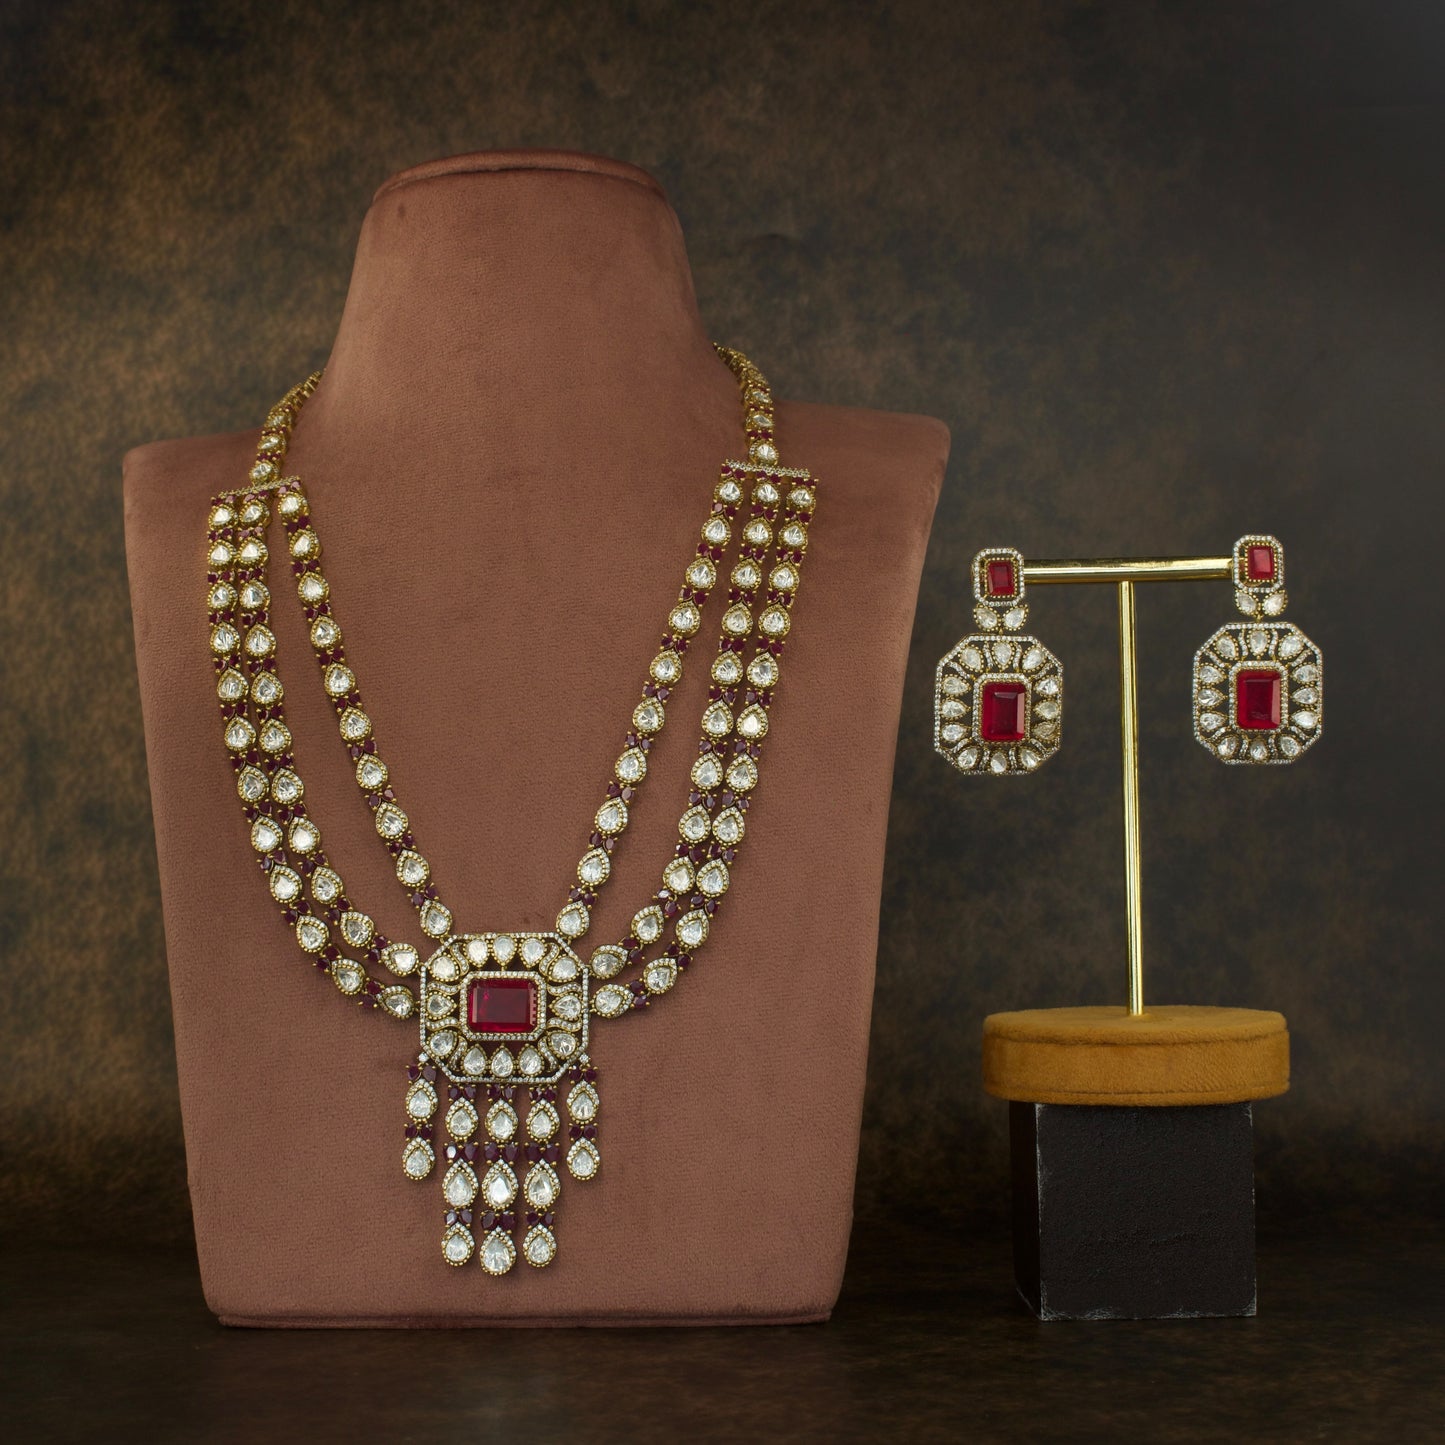 Three Step Heavy Victorian Zircon Necklace Set with High Quality Victorian Finish. This product belongs to Victorian Jewellery Category